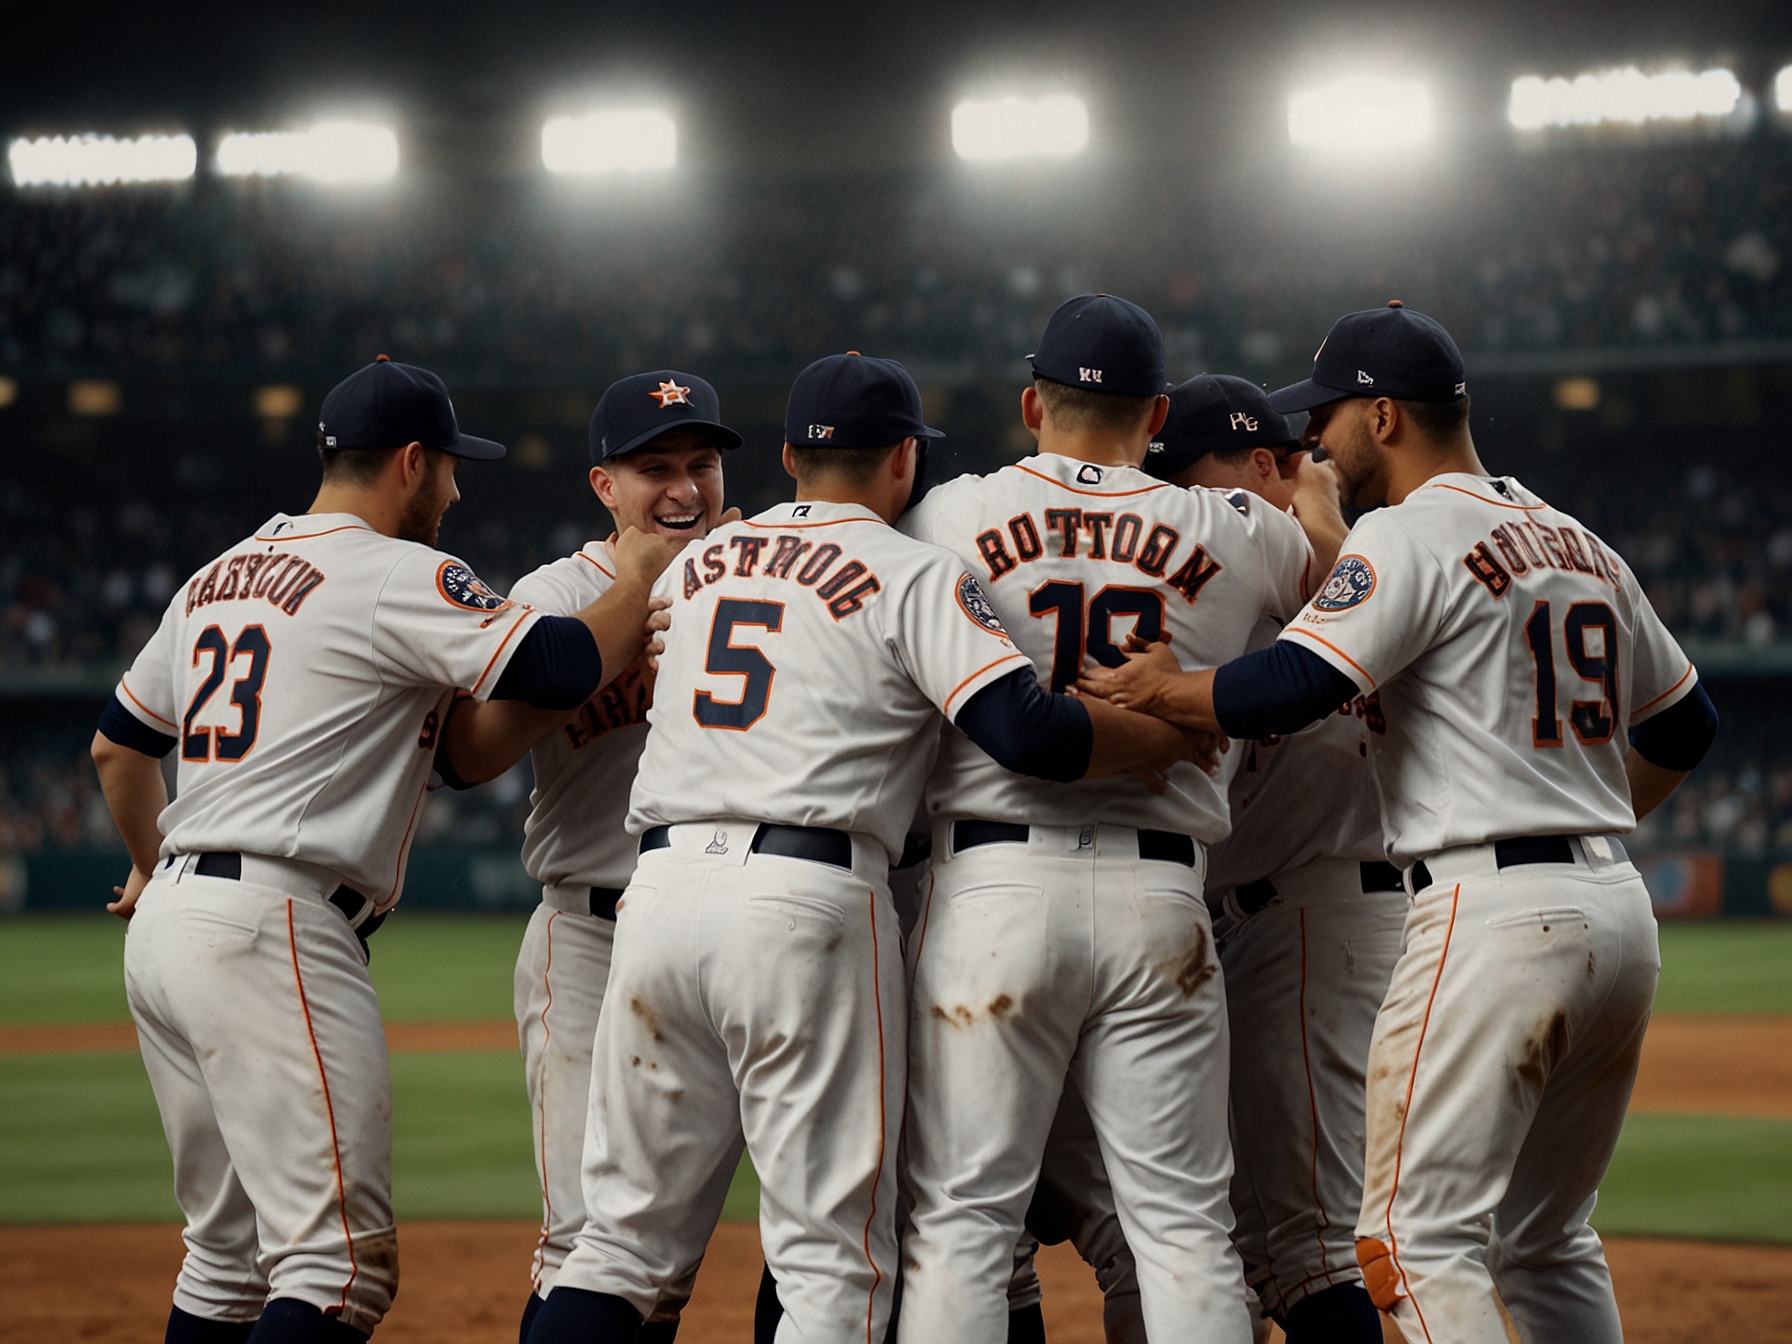 The Houston Astros team shares a moment of triumph on the field after securing a hard-fought 5-3 win over the Chicago White Sox, showcasing their resilience and tactical skill.